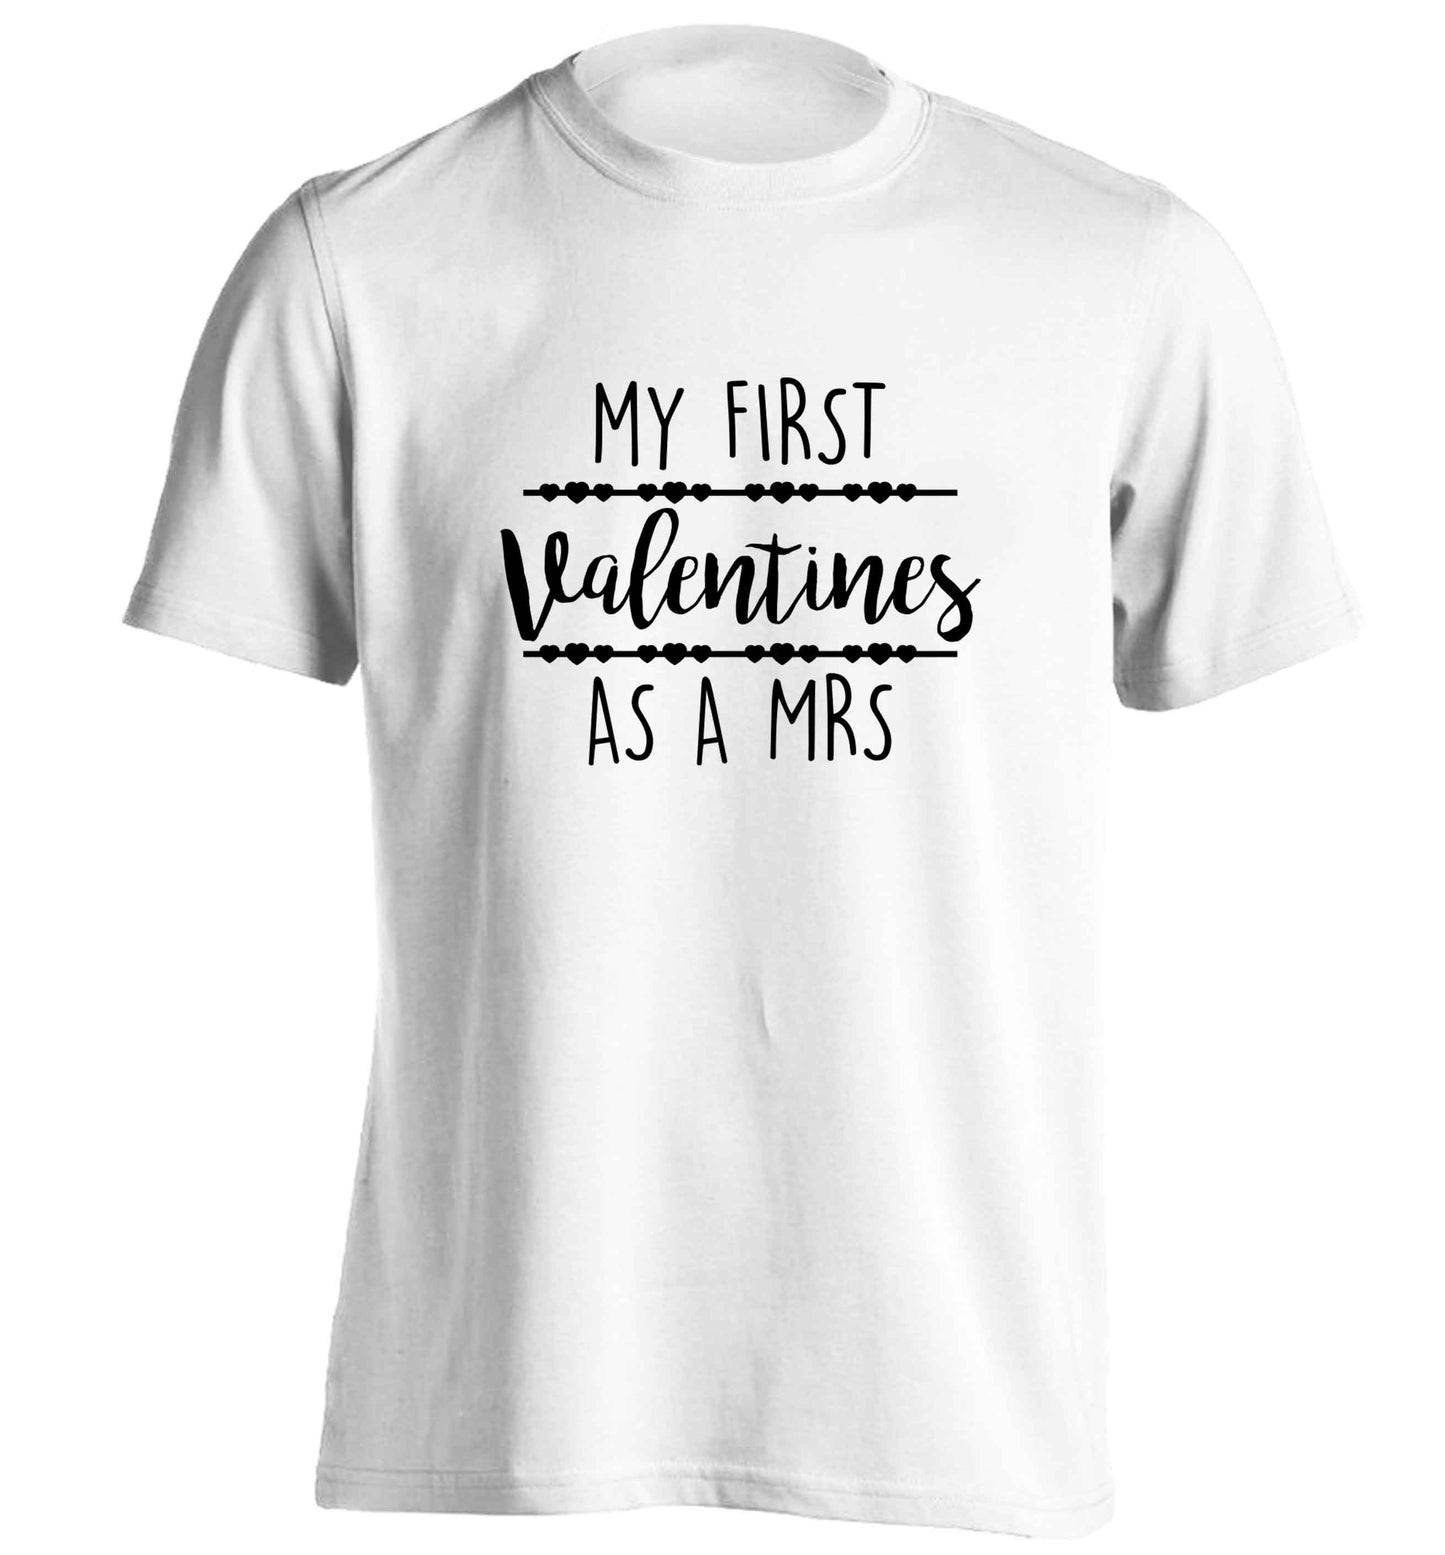 My first valentines as a Mrs adults unisex white Tshirt 2XL